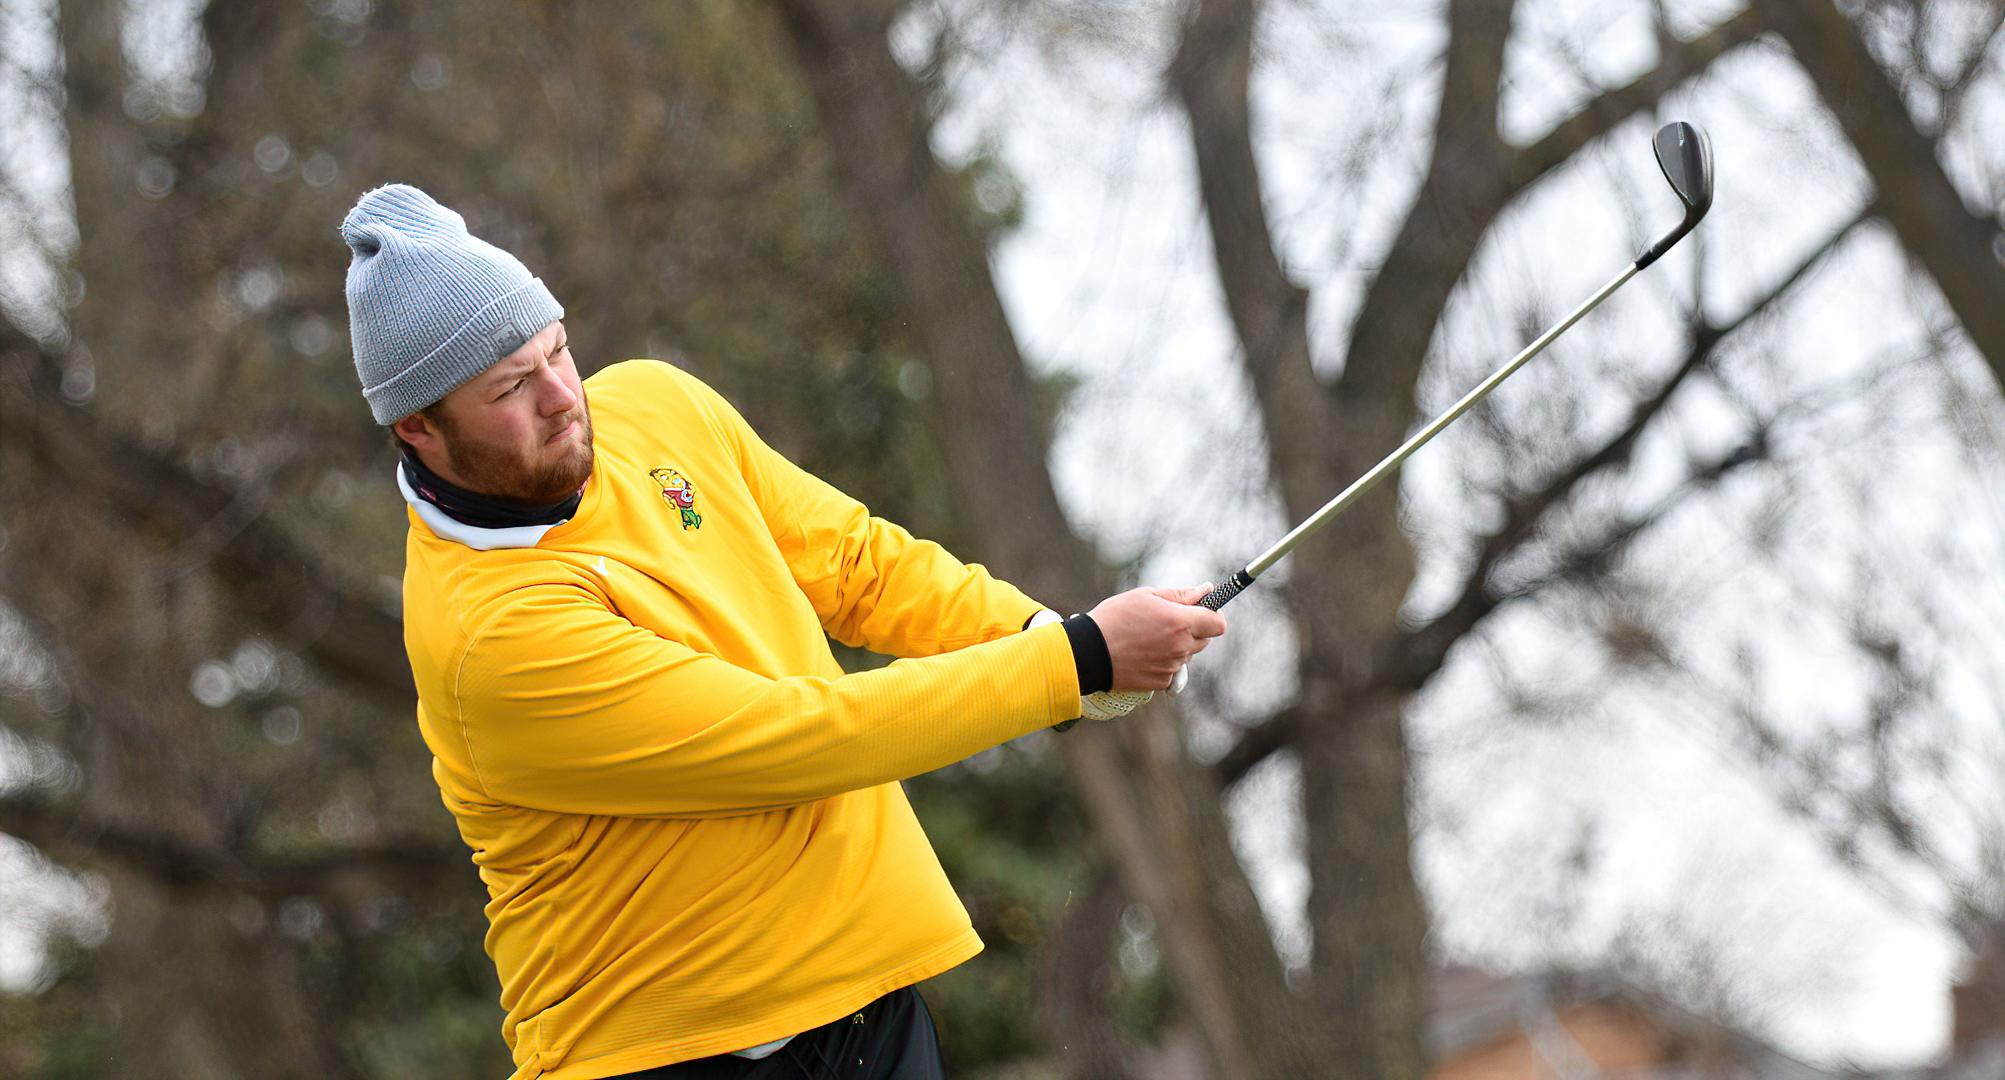 Senior Mason Opheim tied for the lowest score by a Cobber at the SJU Invite. He finished with a 2-round total of 153 which was good for a tie for 26th place.